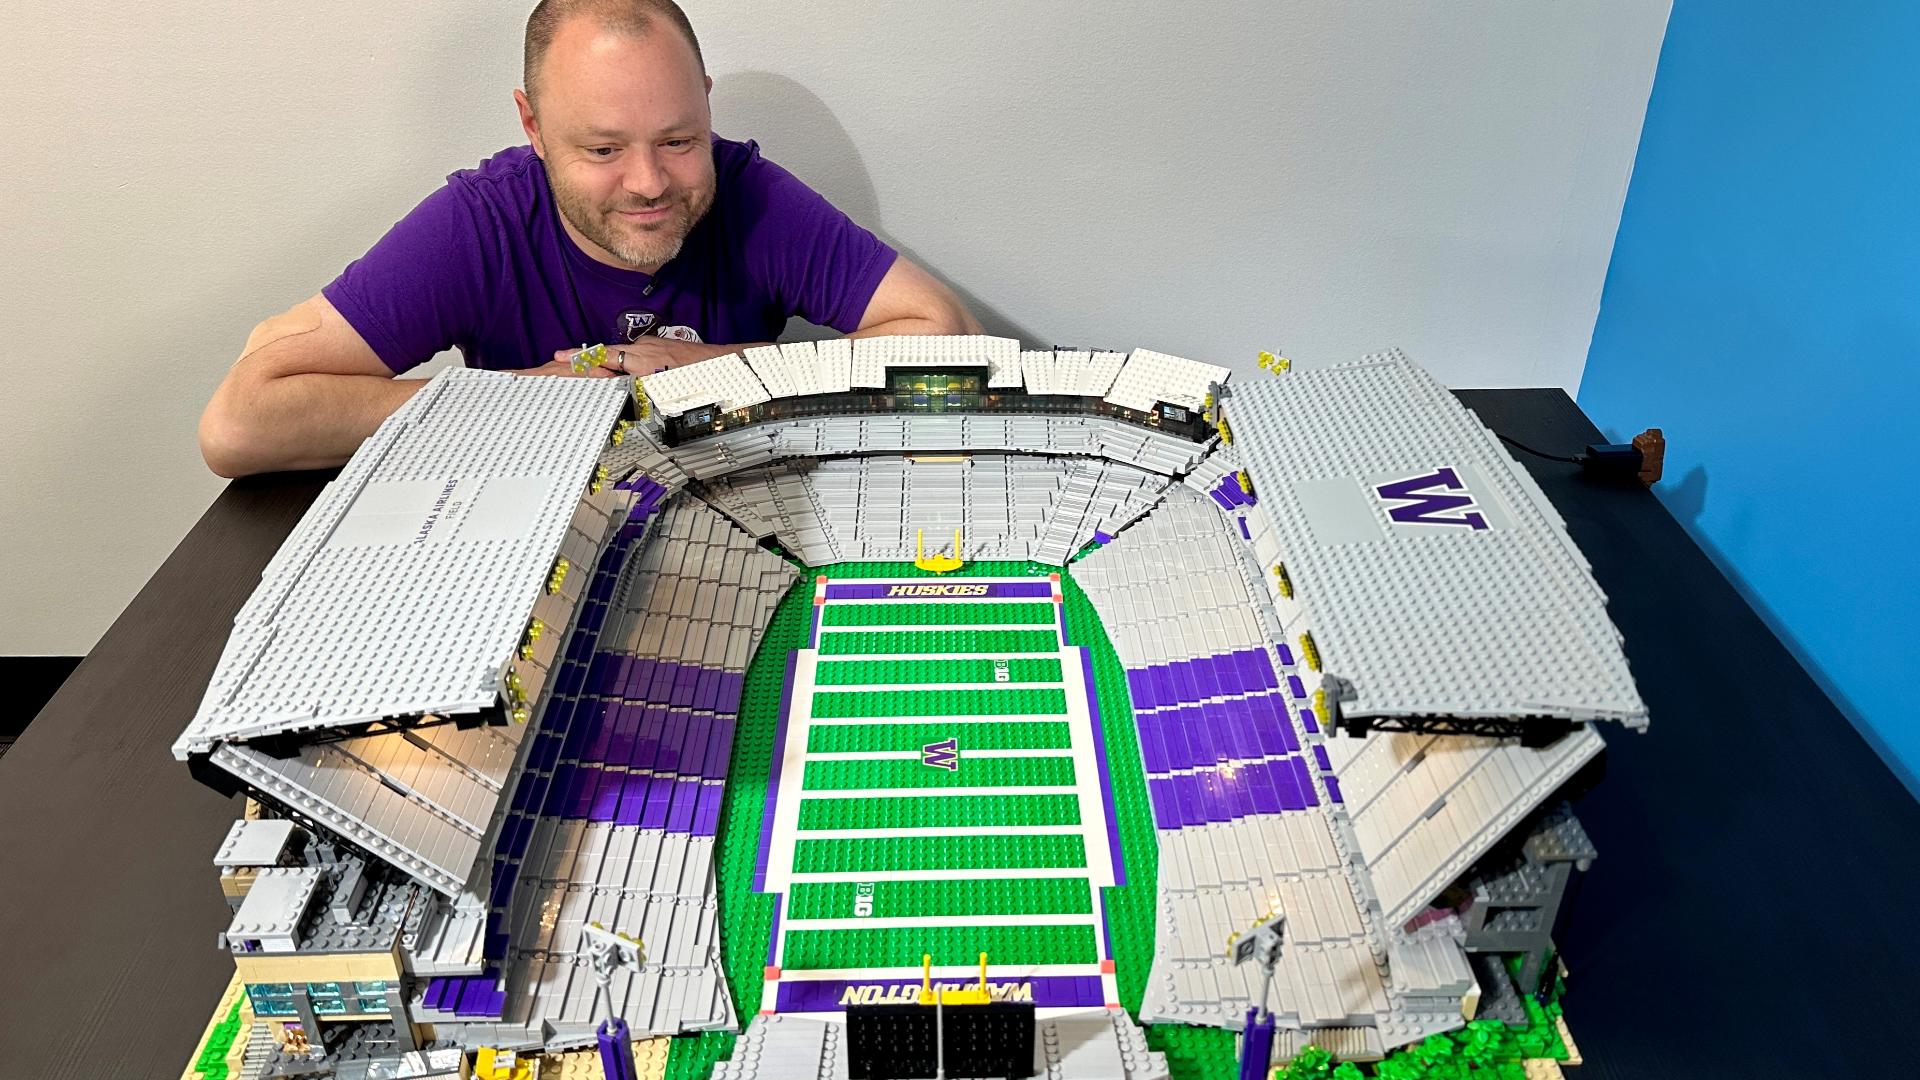 Shane Deegan uses LEGO bricks to replicate iconic locations like Husky Stadium, Dick’s Drive-in, Pike Place Market and MOHAI. #k5evening